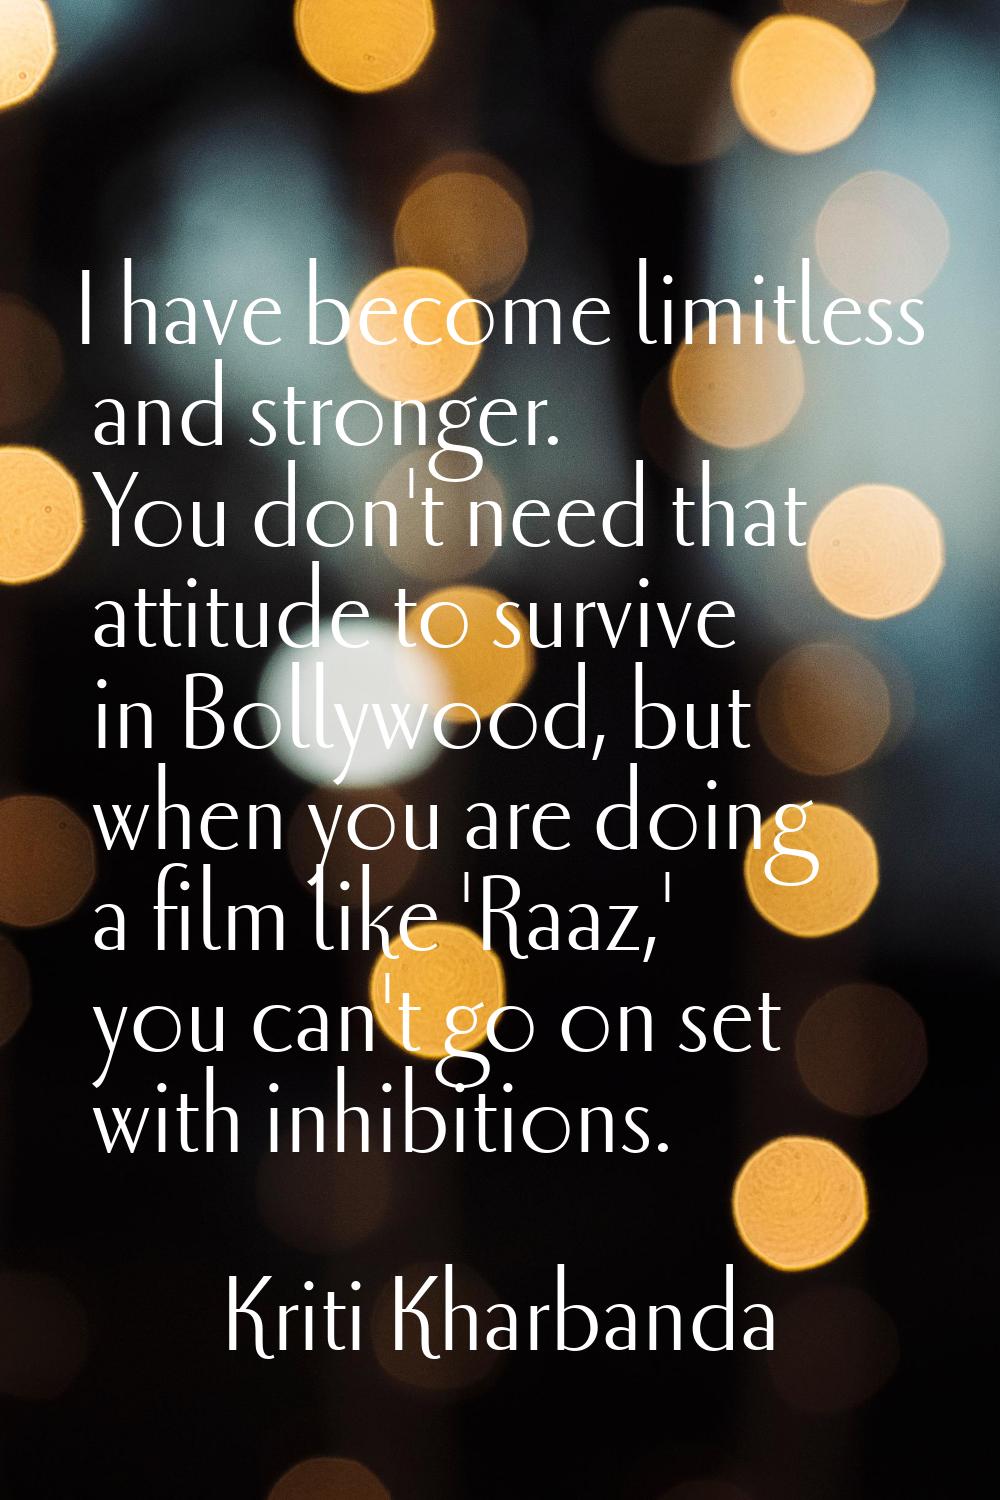 I have become limitless and stronger. You don't need that attitude to survive in Bollywood, but whe